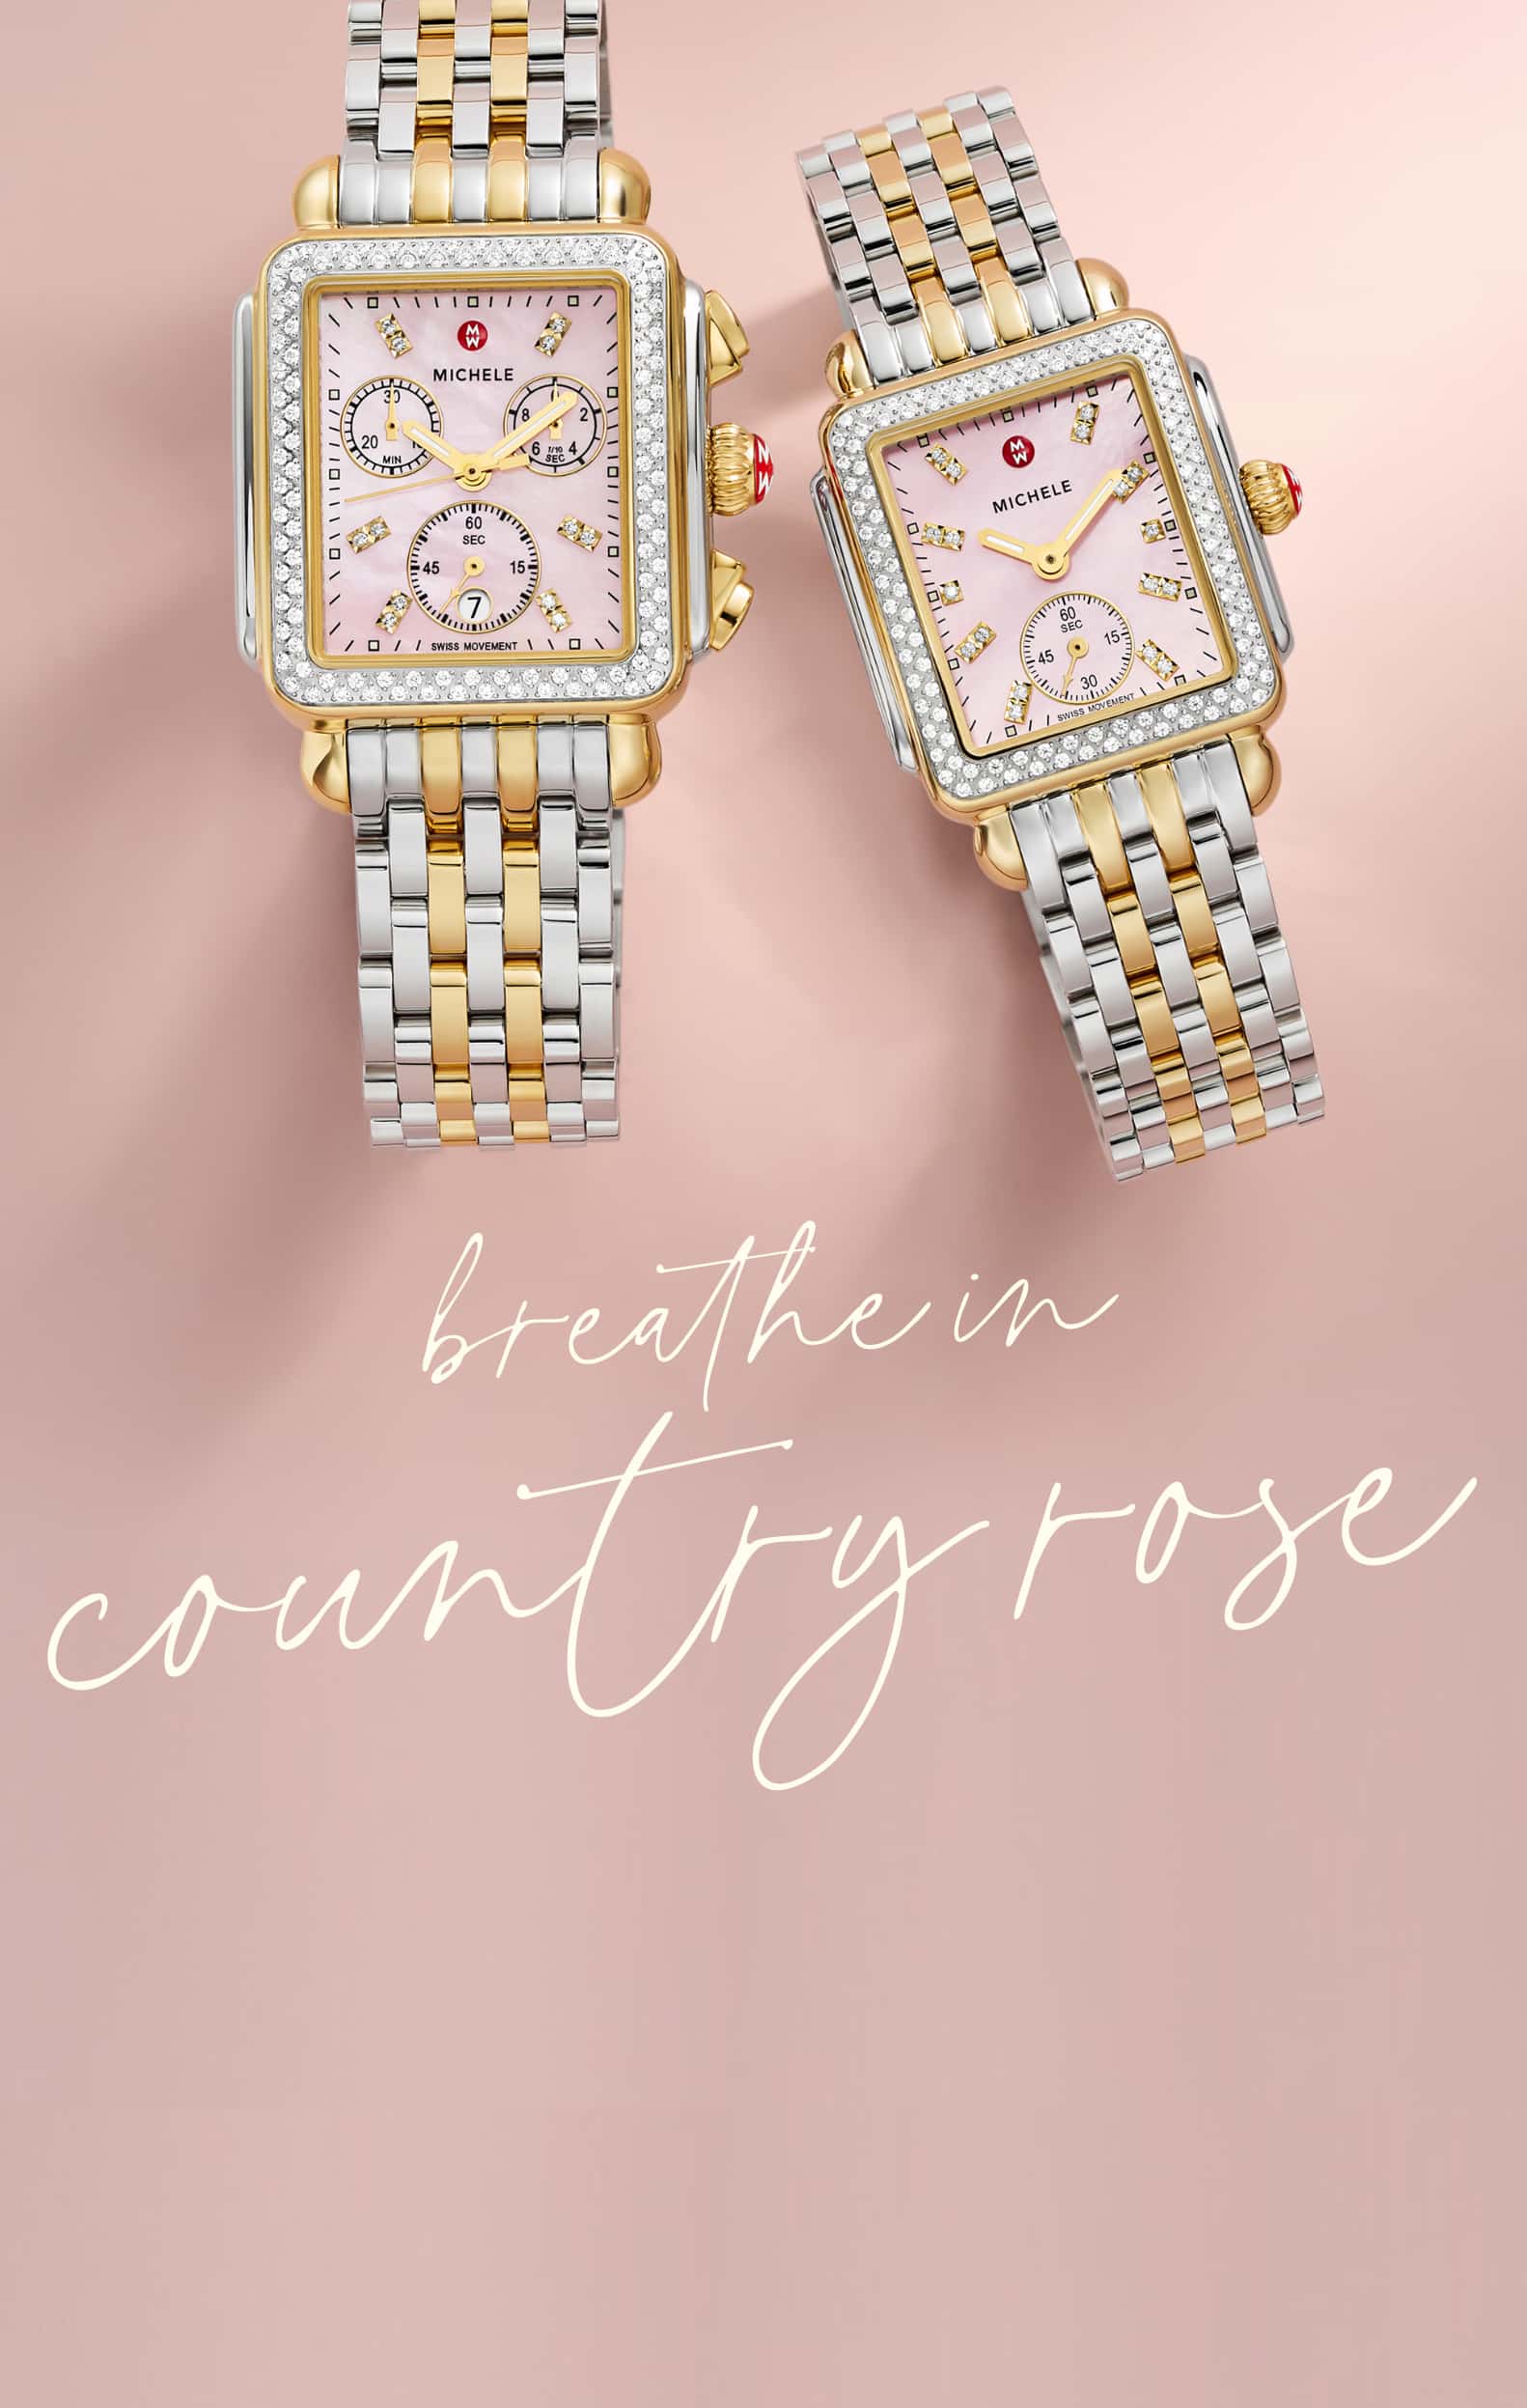 Deco & Deco Mid shine in the freshest colorway from MICHELE: Country Rose.